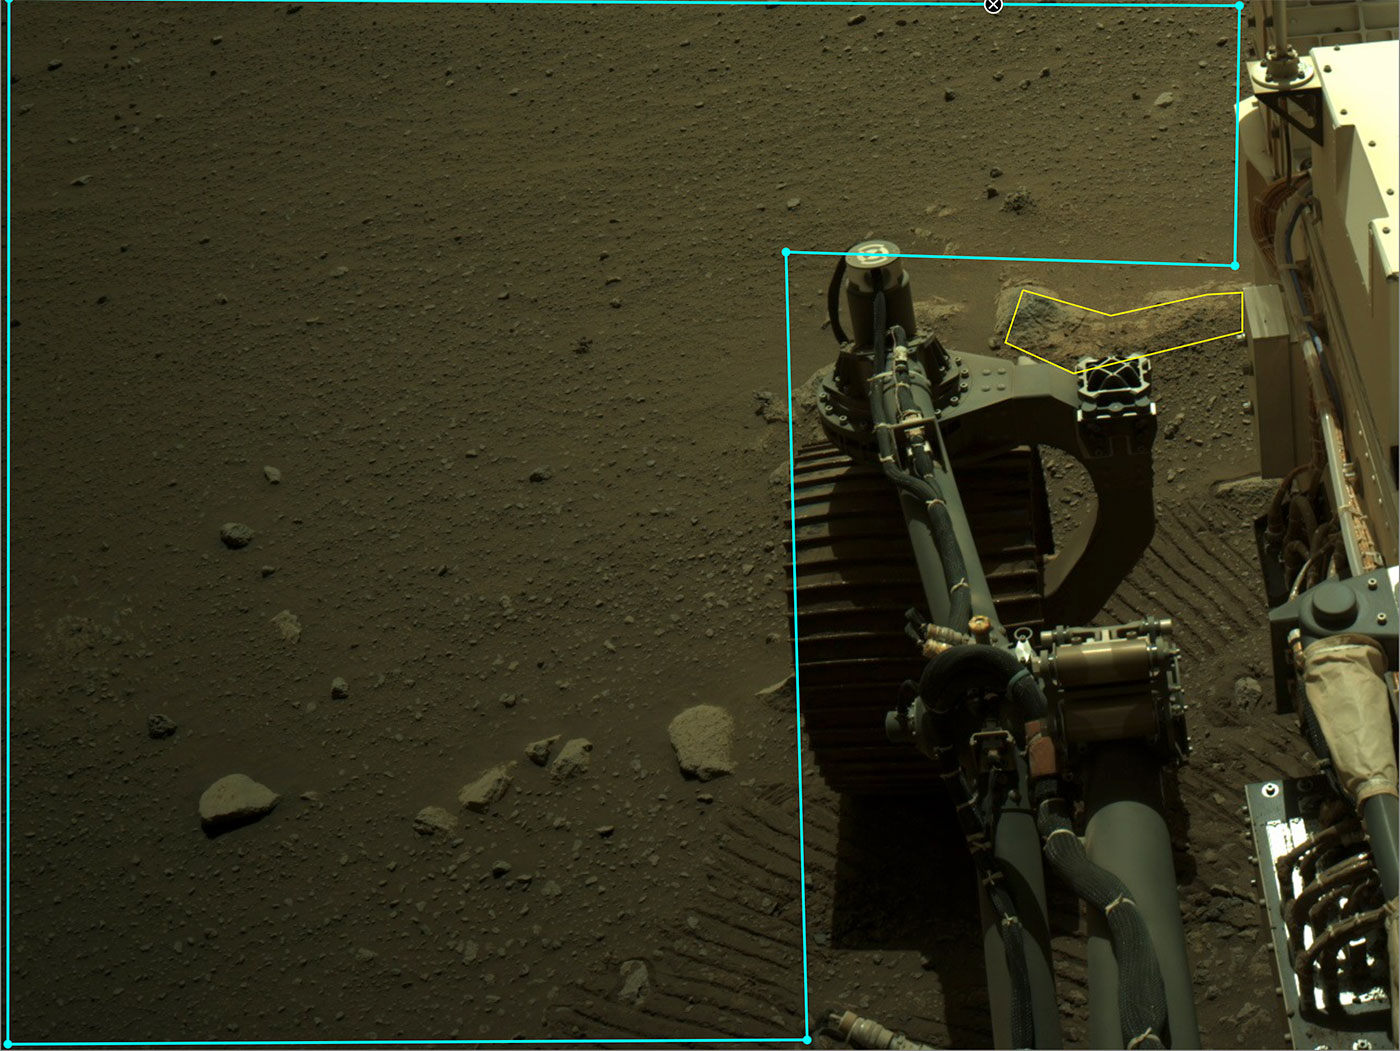 This is an annotated image of Perseverance's robotic arm and an outlined area in AI4Mars. The rover is positioned to the right and wheel tracks and the rocky, sandy surface of Mars are visible in the background.